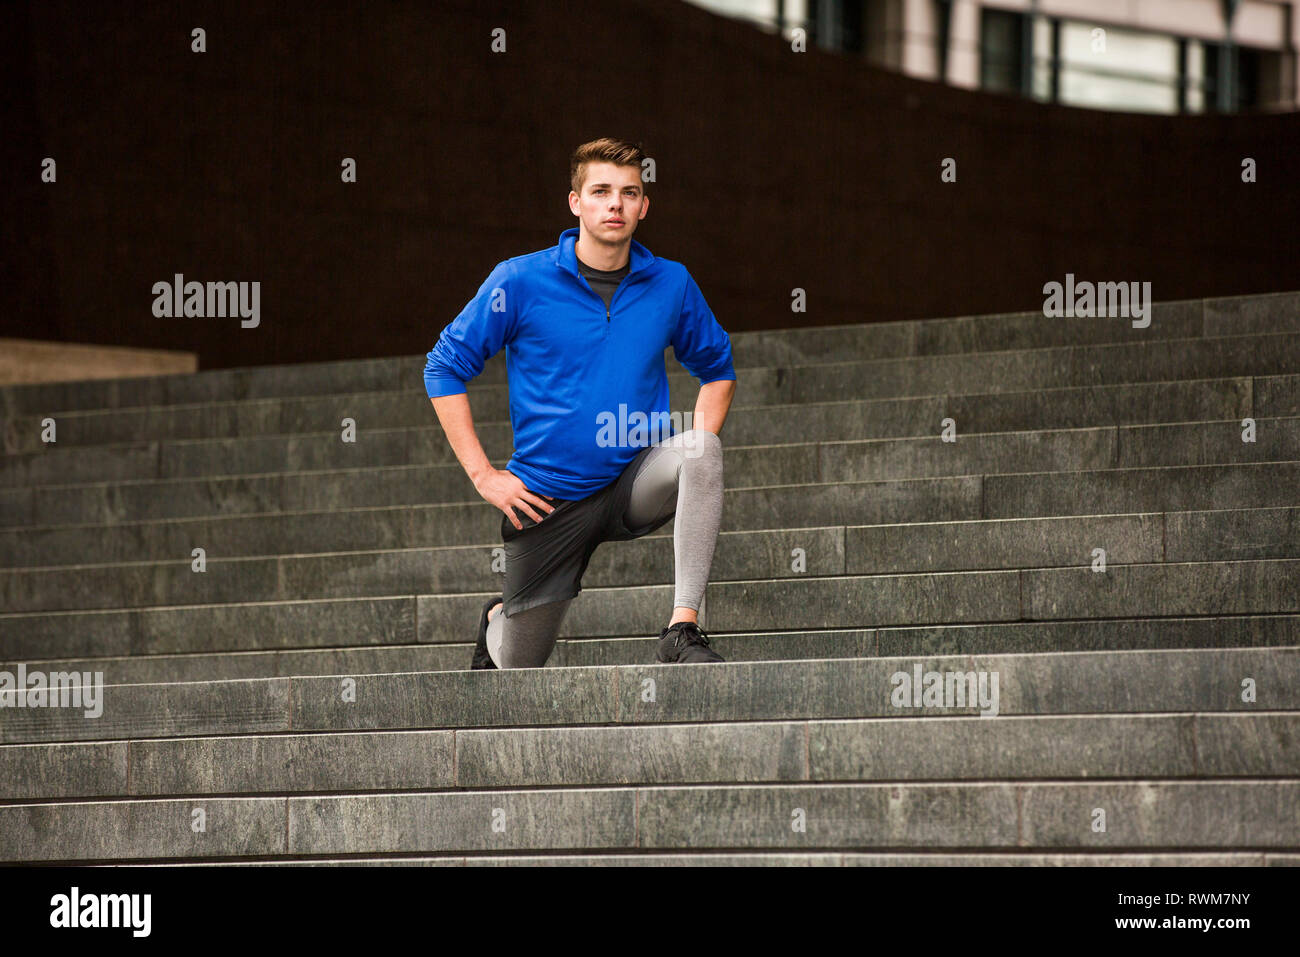 Young runner stretching sur mesures, London, UK Banque D'Images